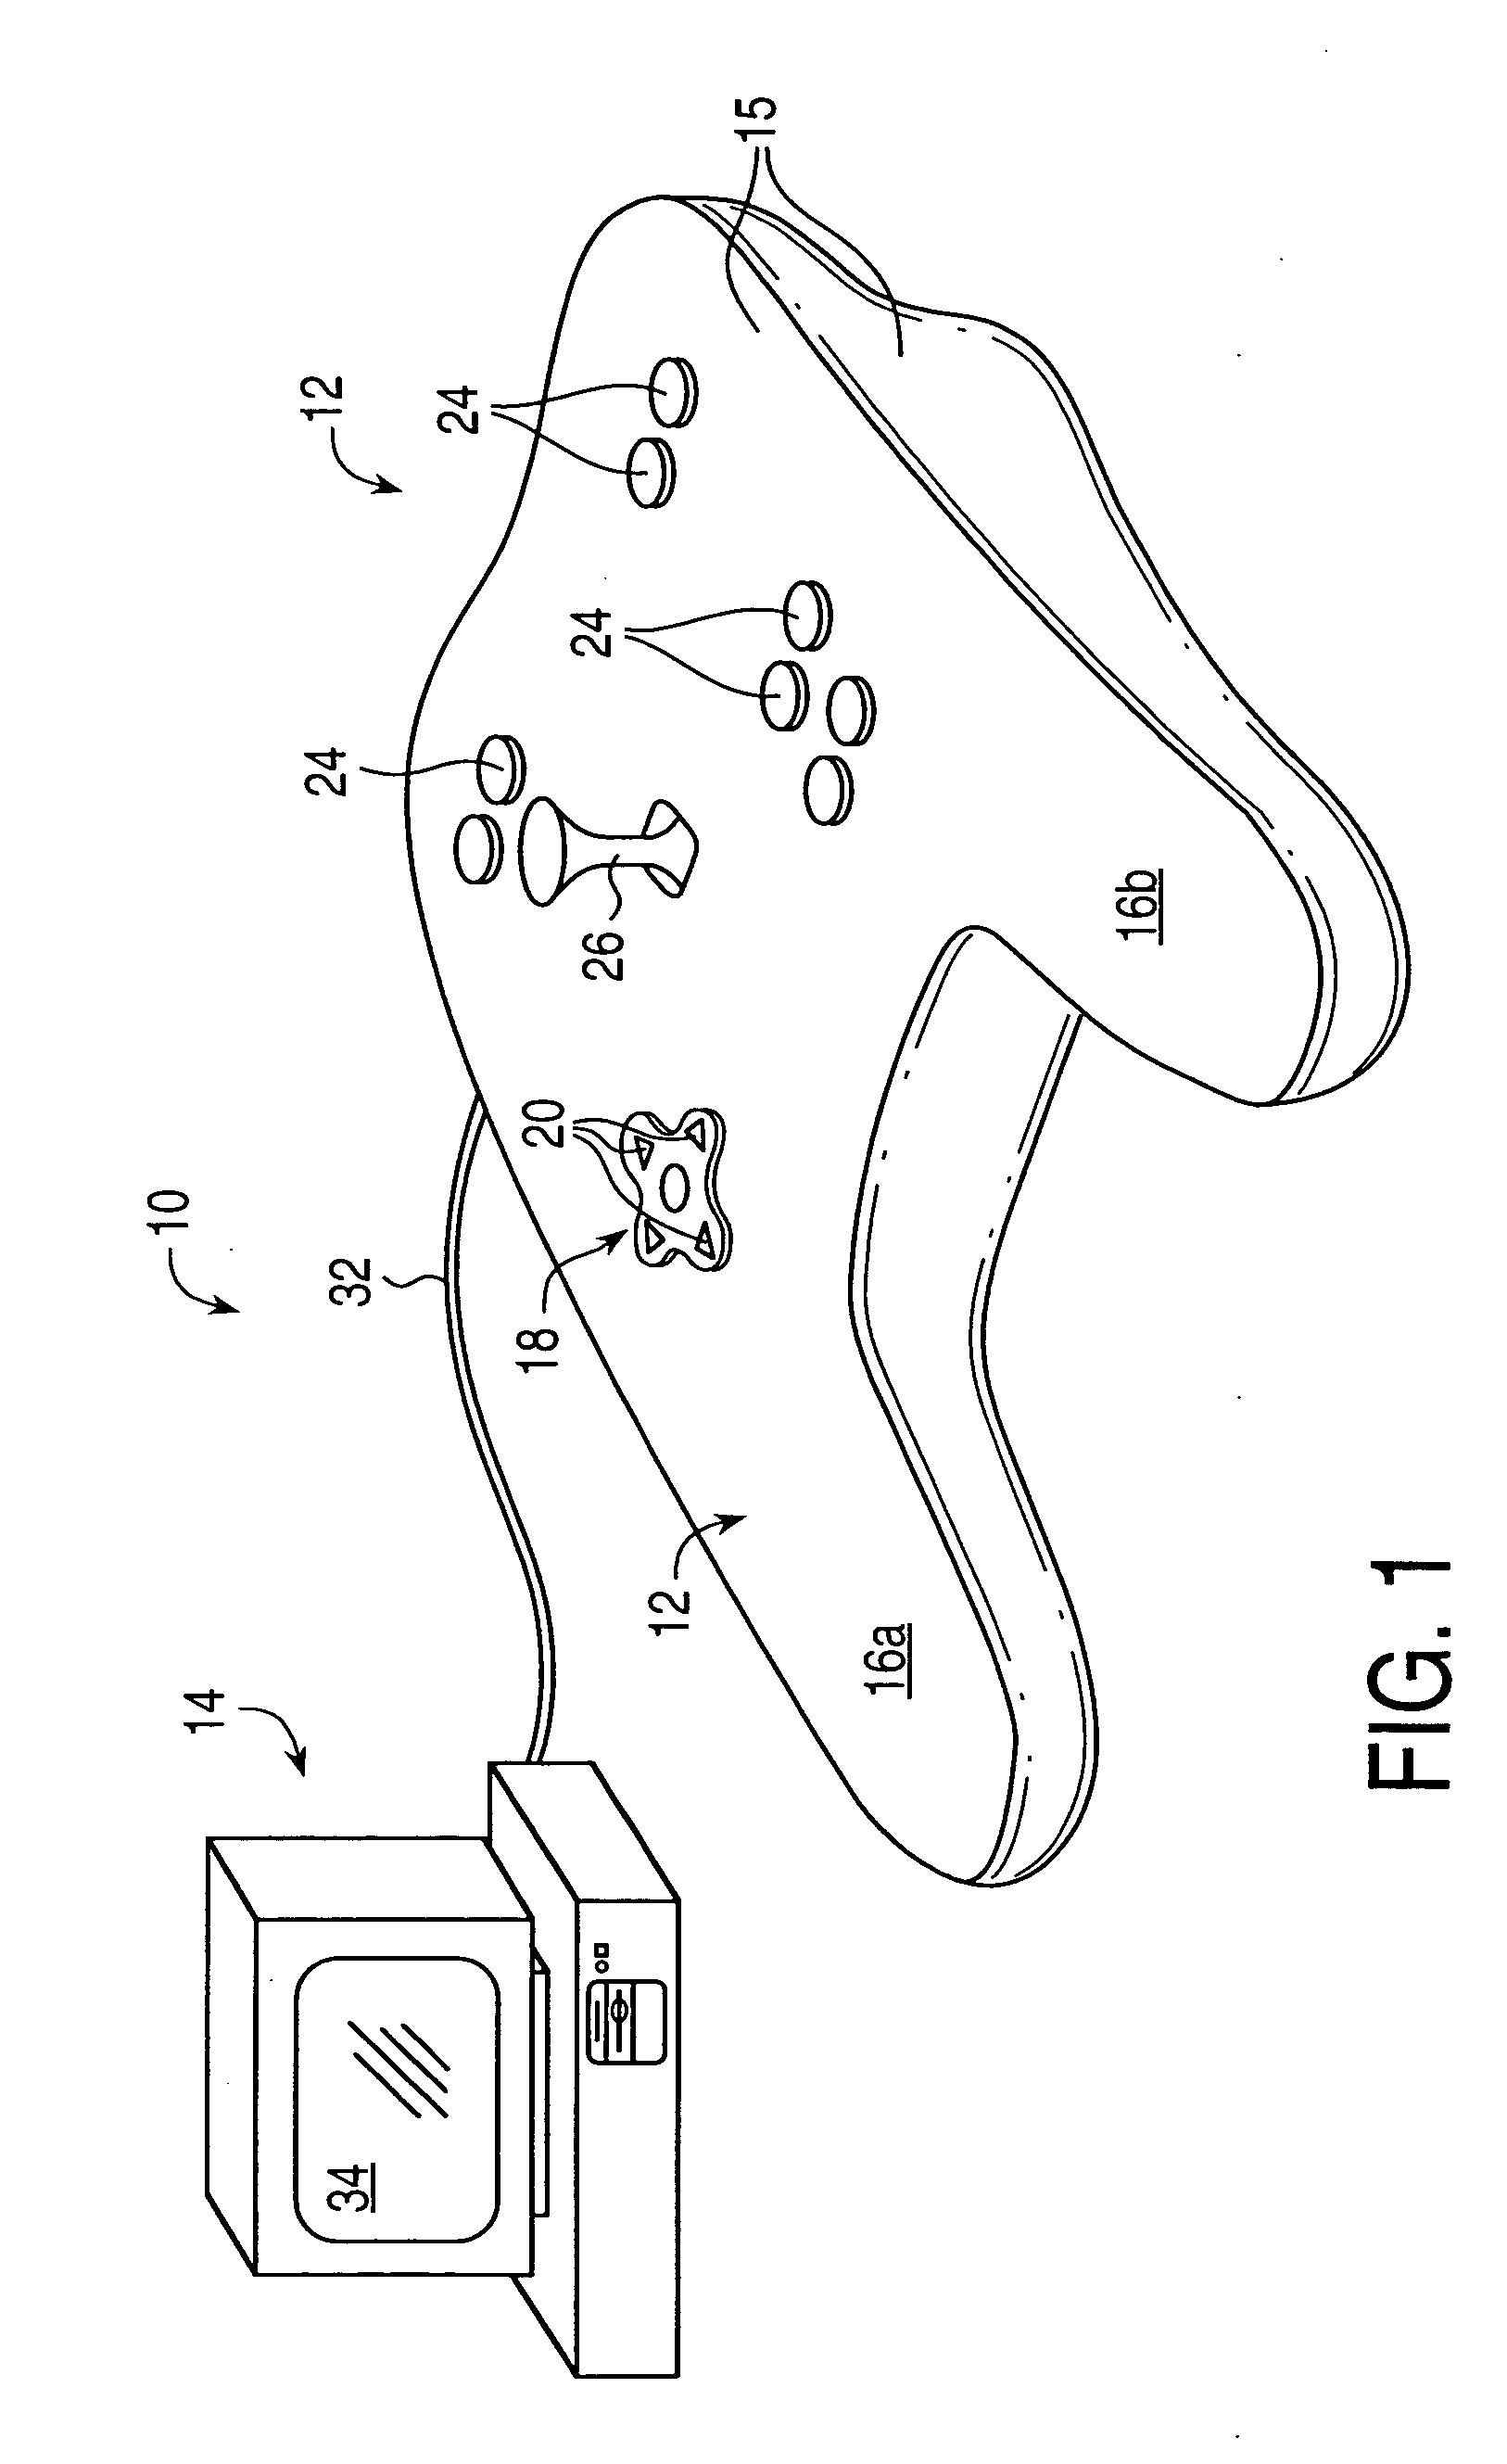 Directional tactile feedback for haptic feedback interface devices